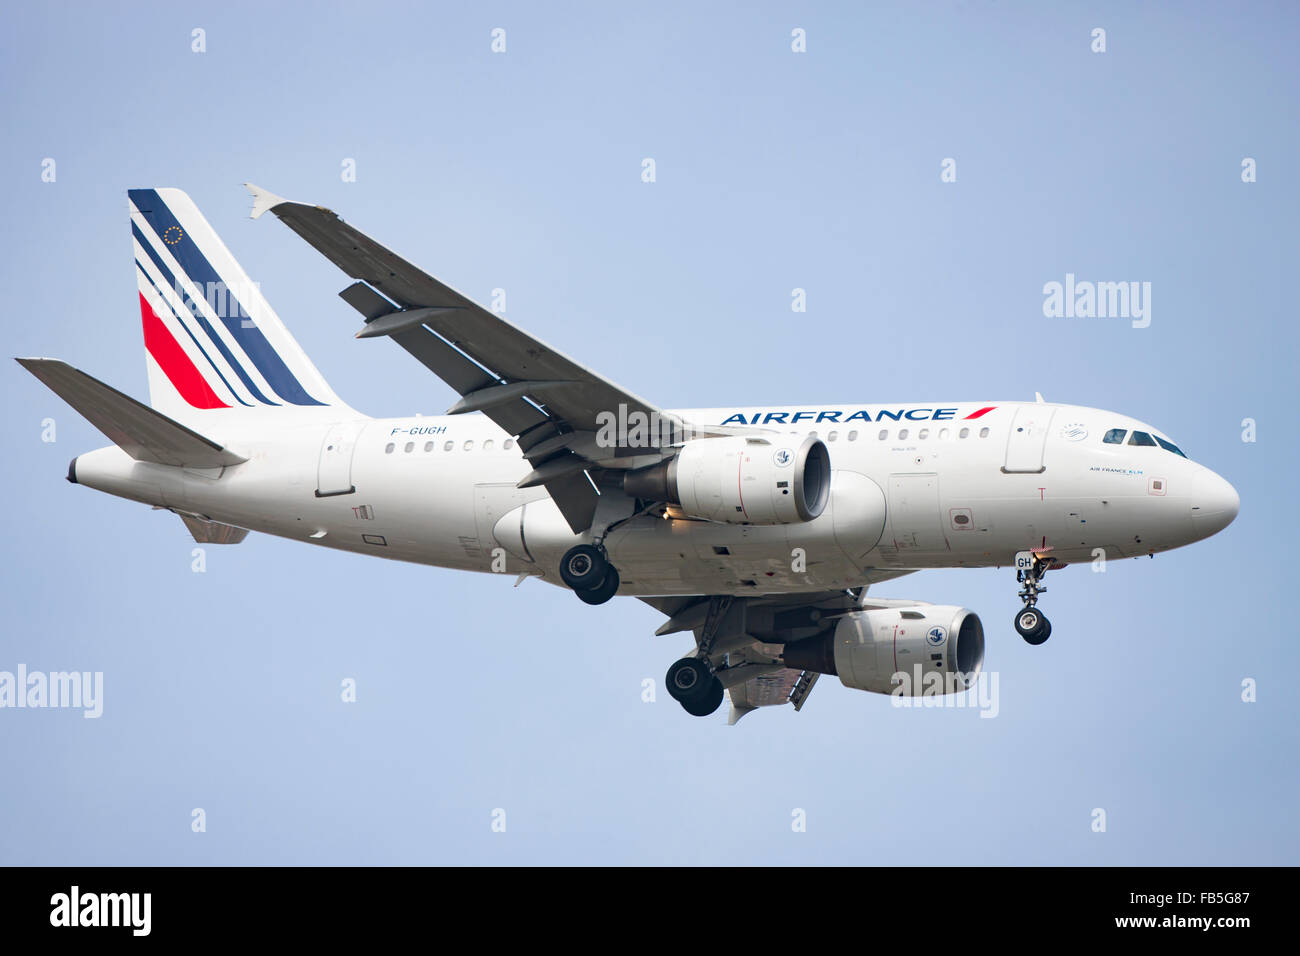 Airfrance Airliner Stock Photo